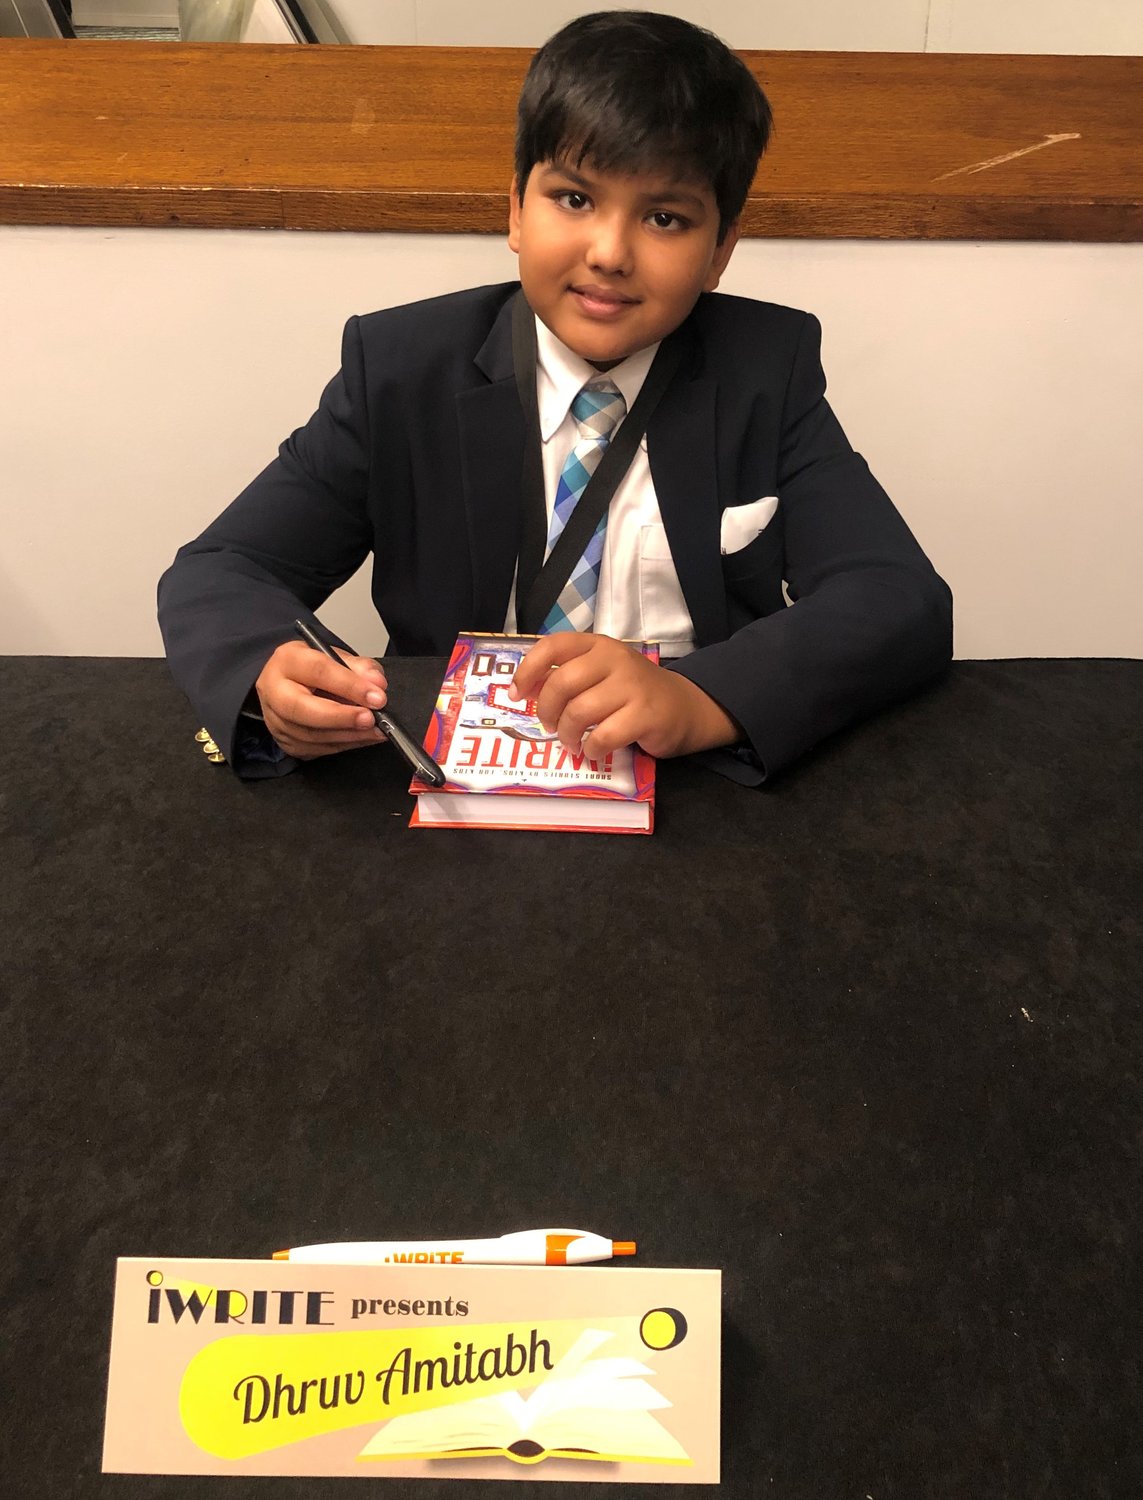 Dhruv Amitabh signs copies of iWRITE's "Short Stories By Kids For Kids."